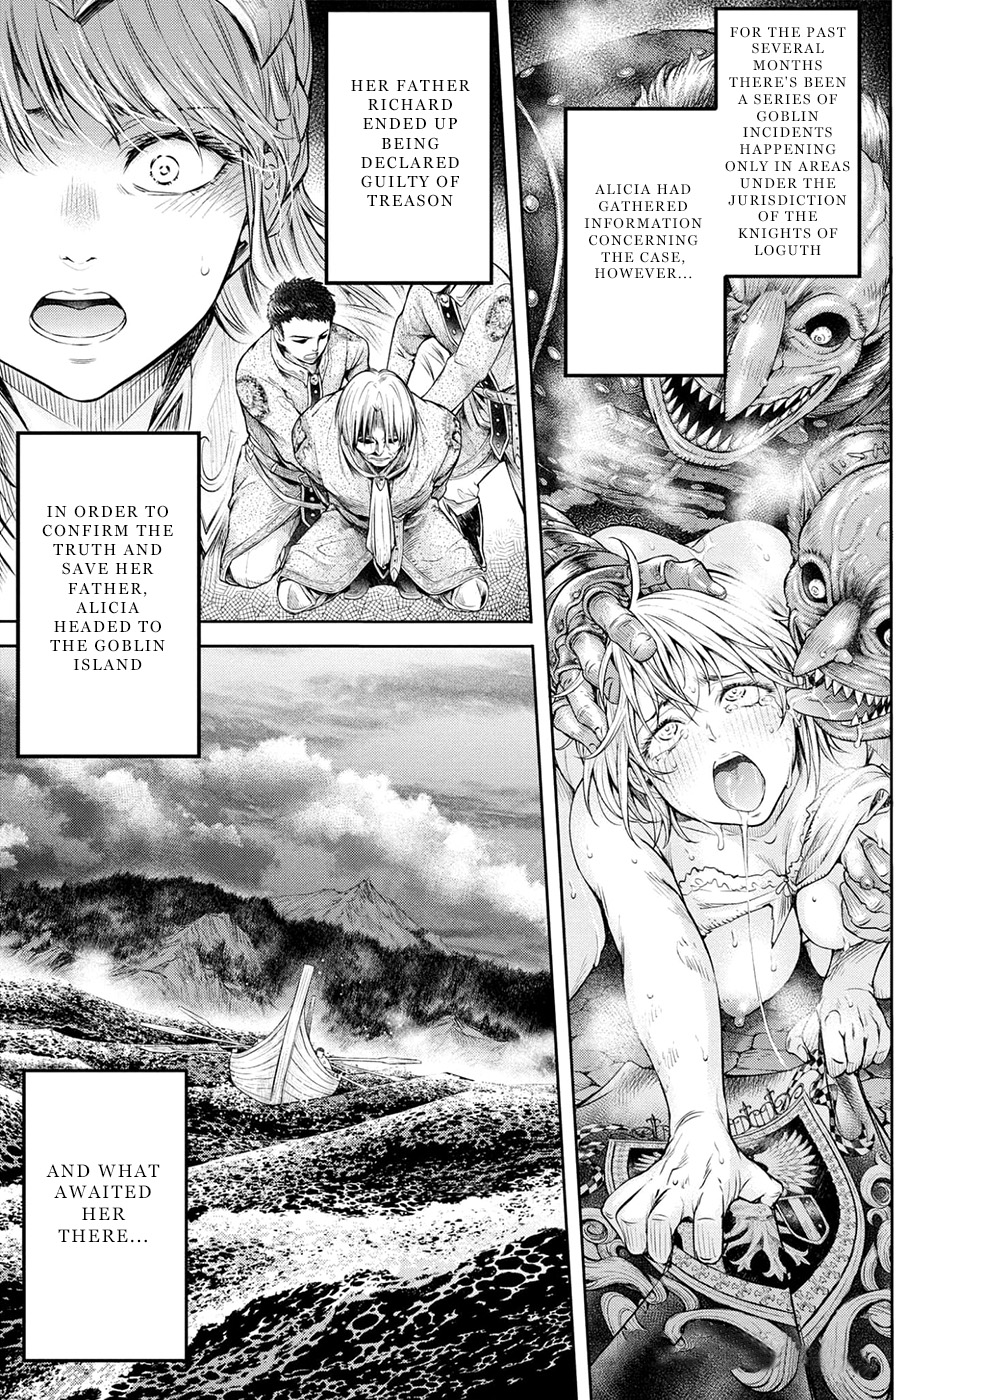 A Female Warrior Who Fell To The Goblin Kingdom Vol.1 Chapter 8: Alicia's Lamentation - Part 2 - - Picture 2